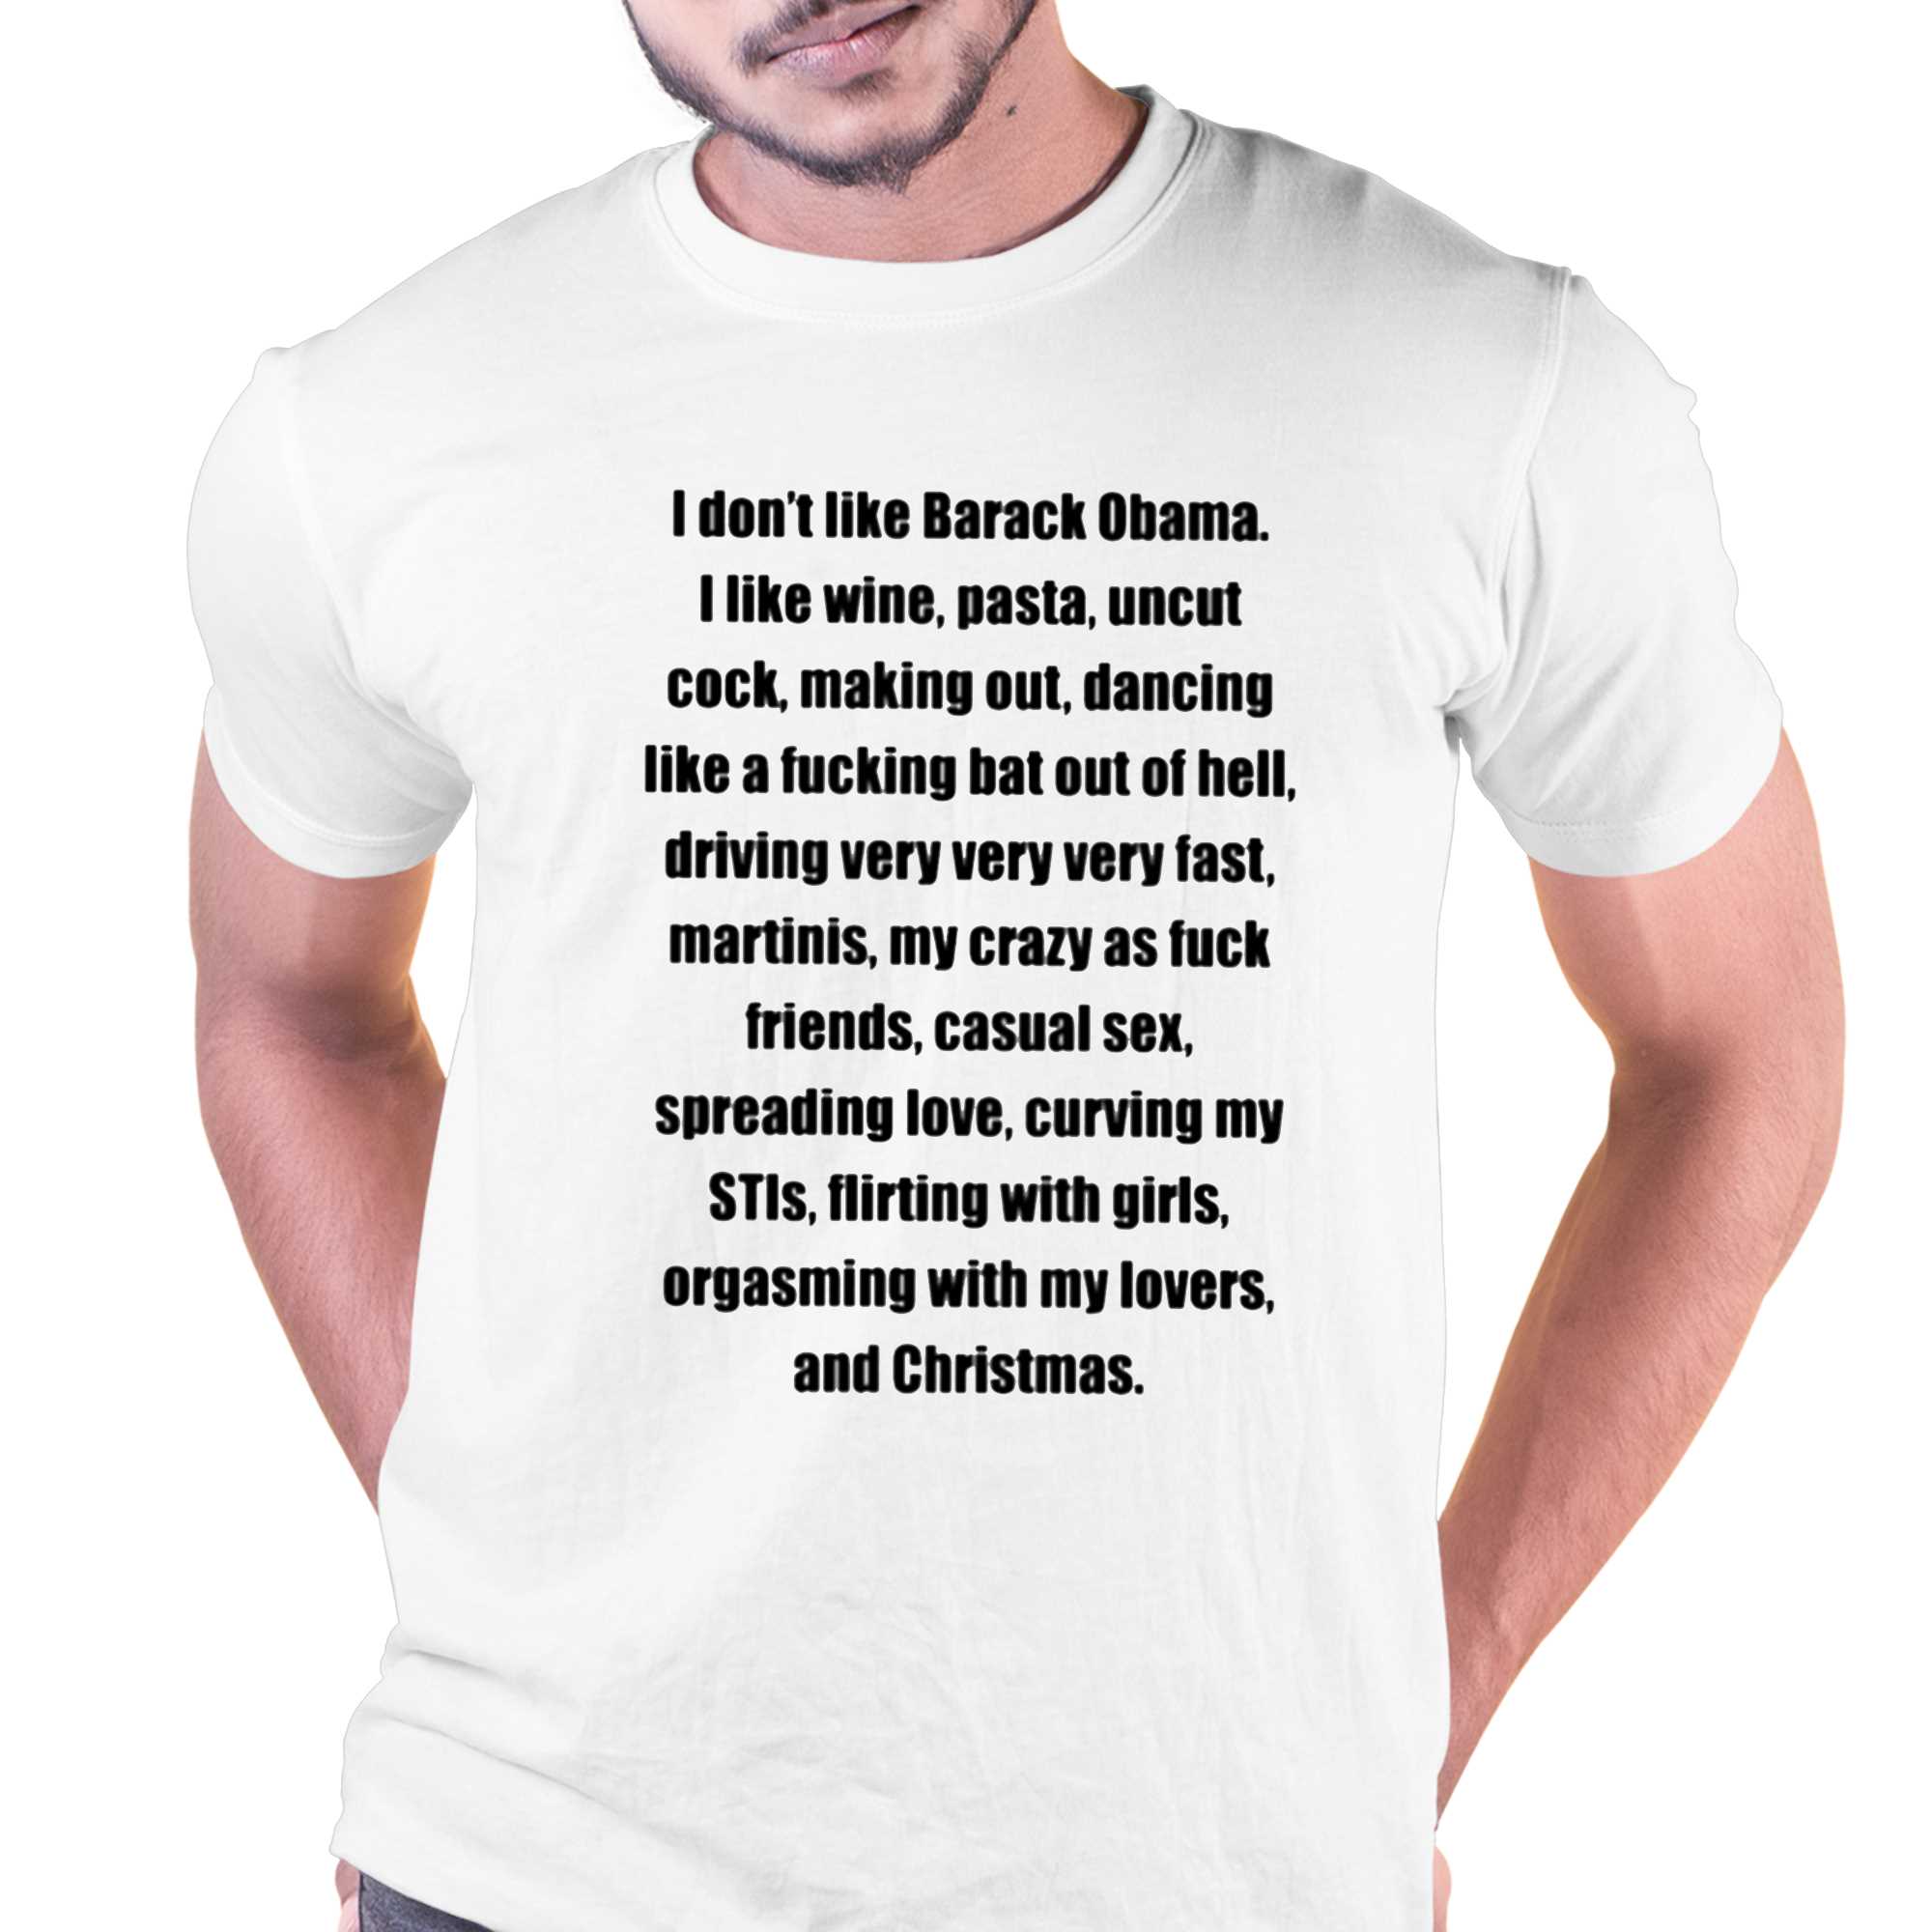 Don't Care Boobs Bounce When I Walk Funny Humor Women's Says T